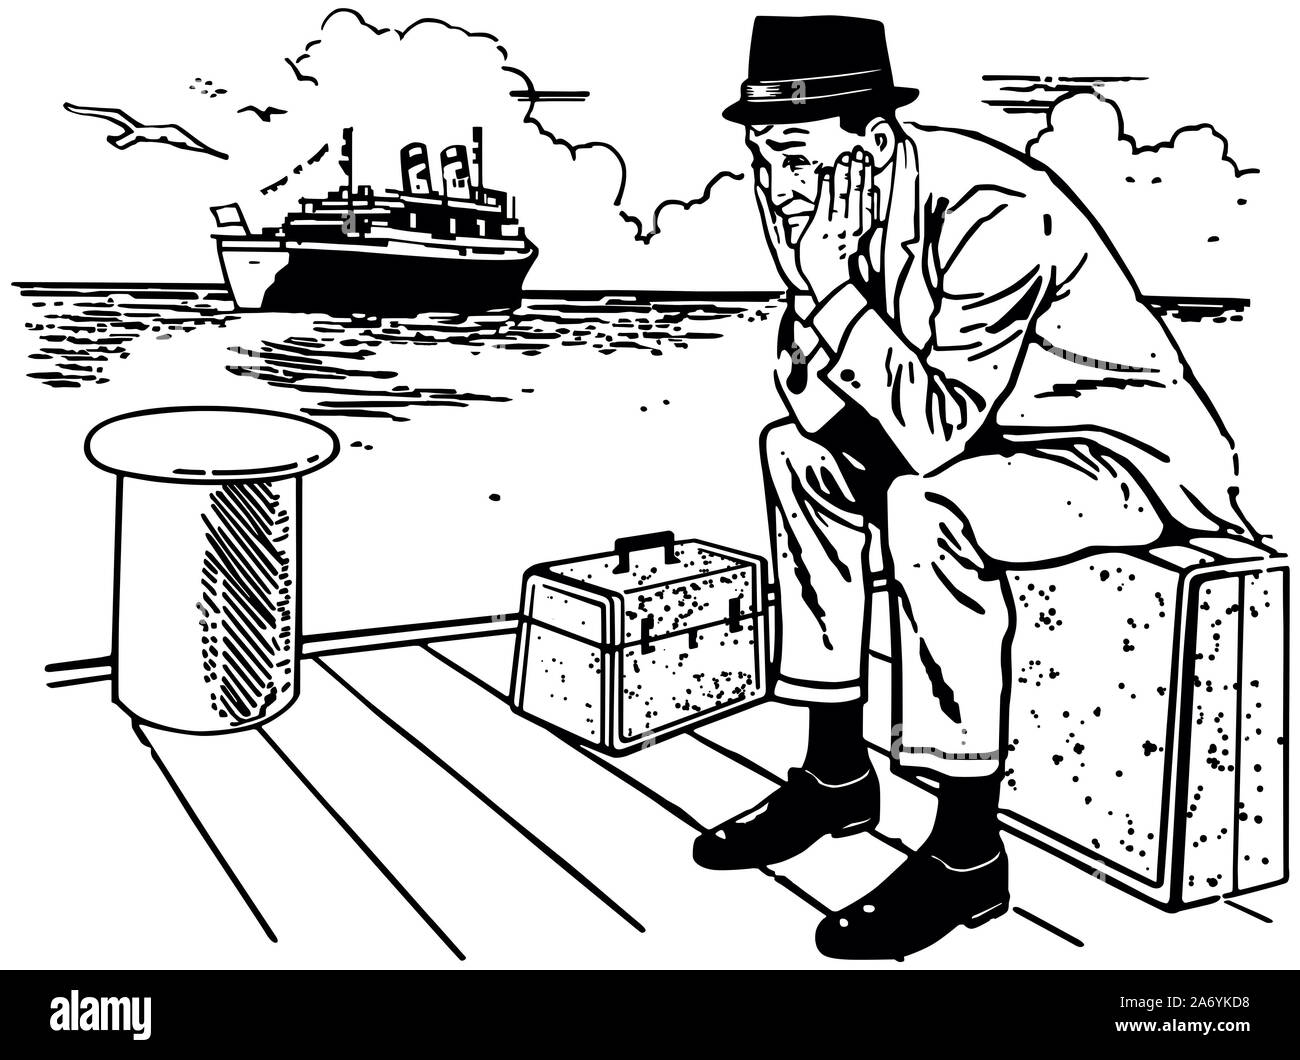 Missed The Boat - Dejected man sitting on dock Stock Photo